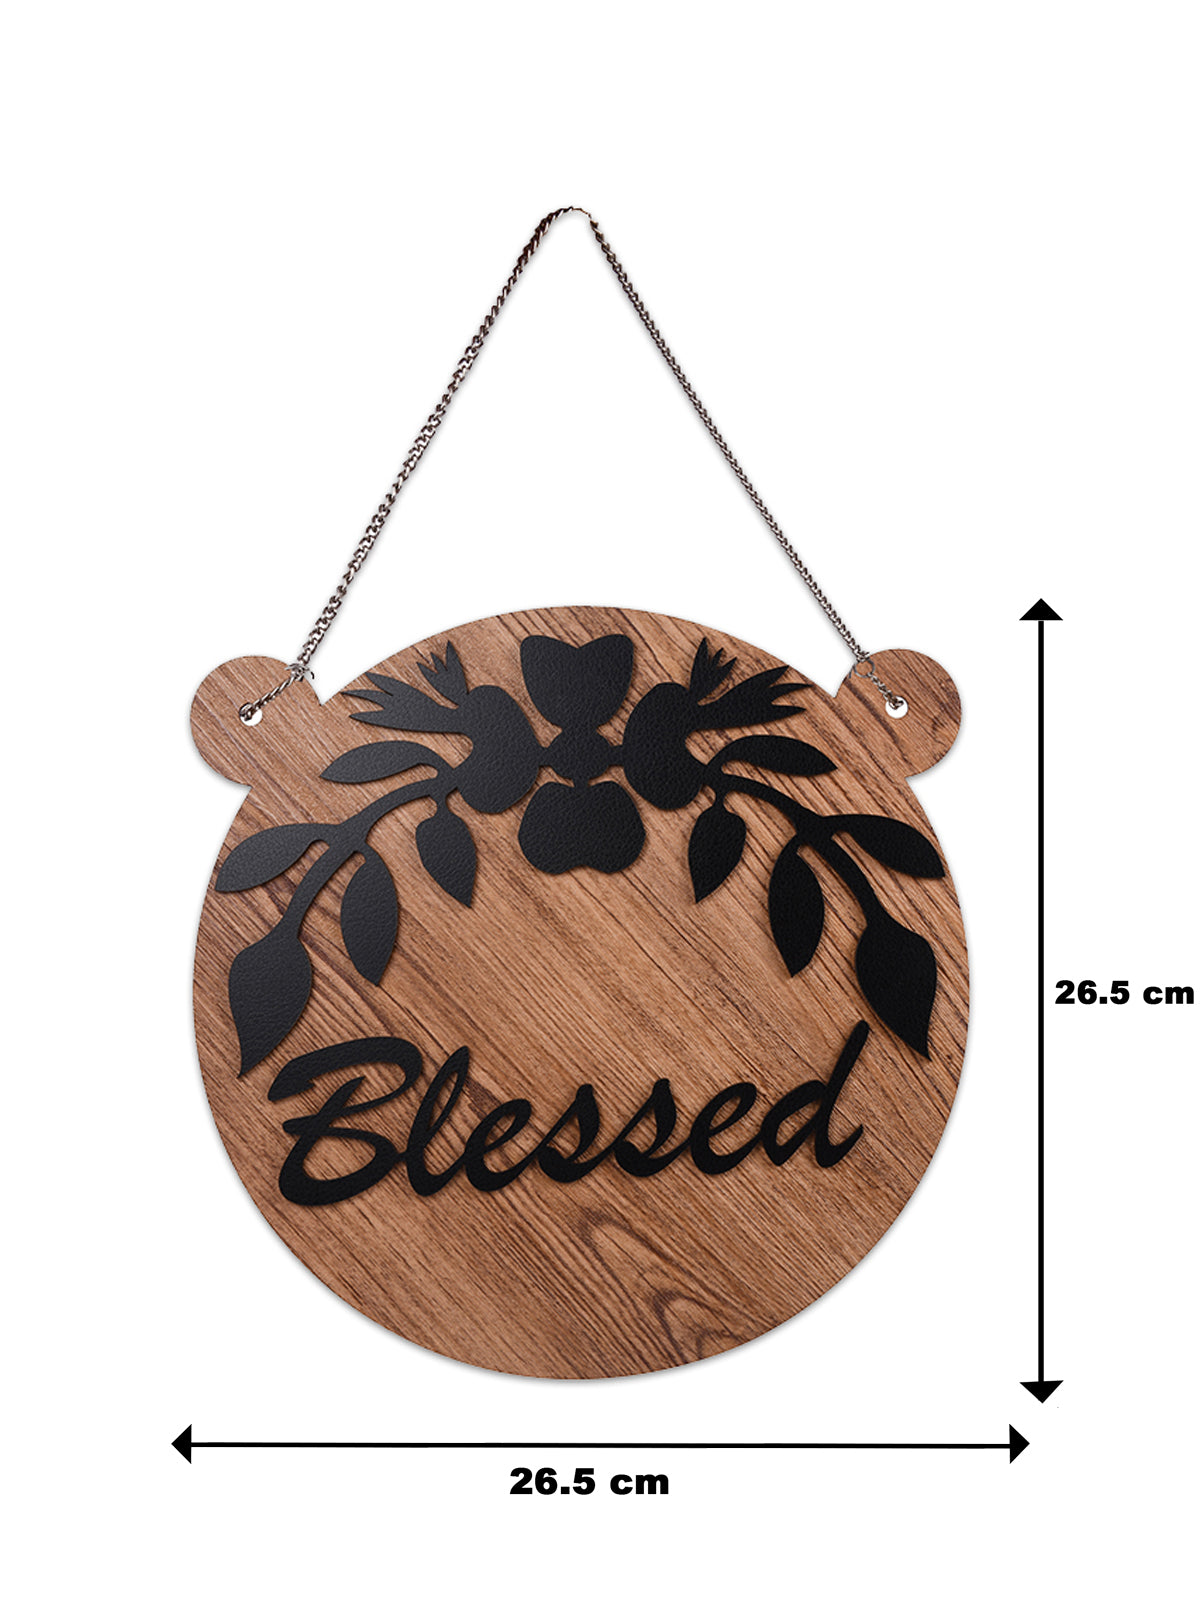 Blessed Round with Ear Wooden Wall Hanging